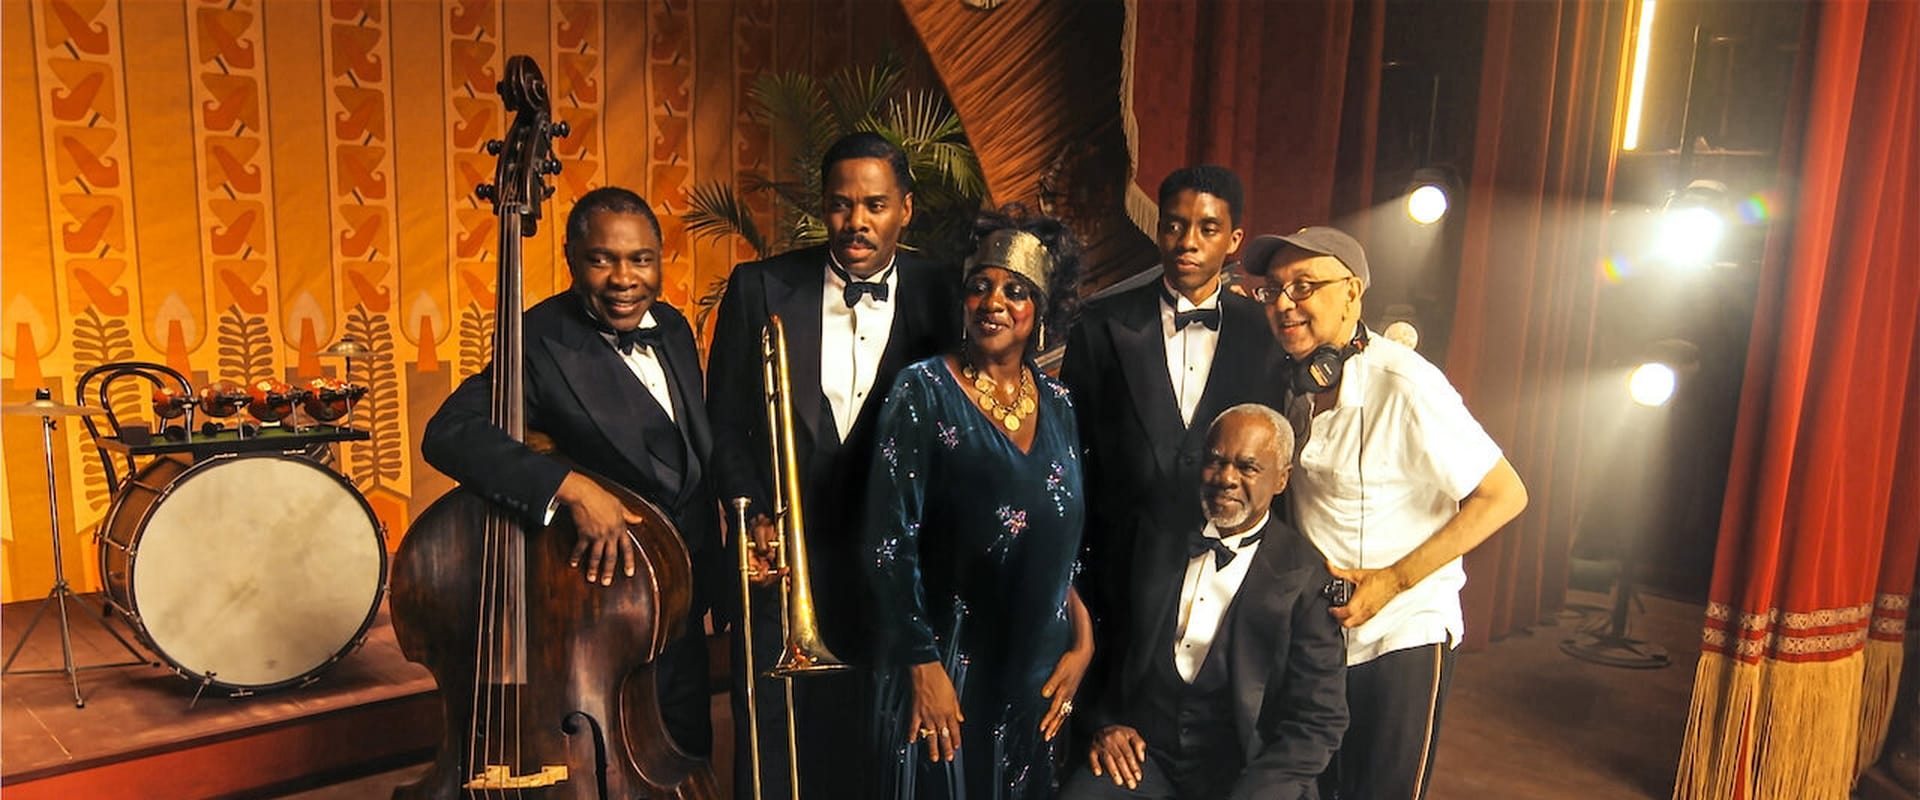 Ma Rainey's Black Bottom: A Legacy Brought to Screen